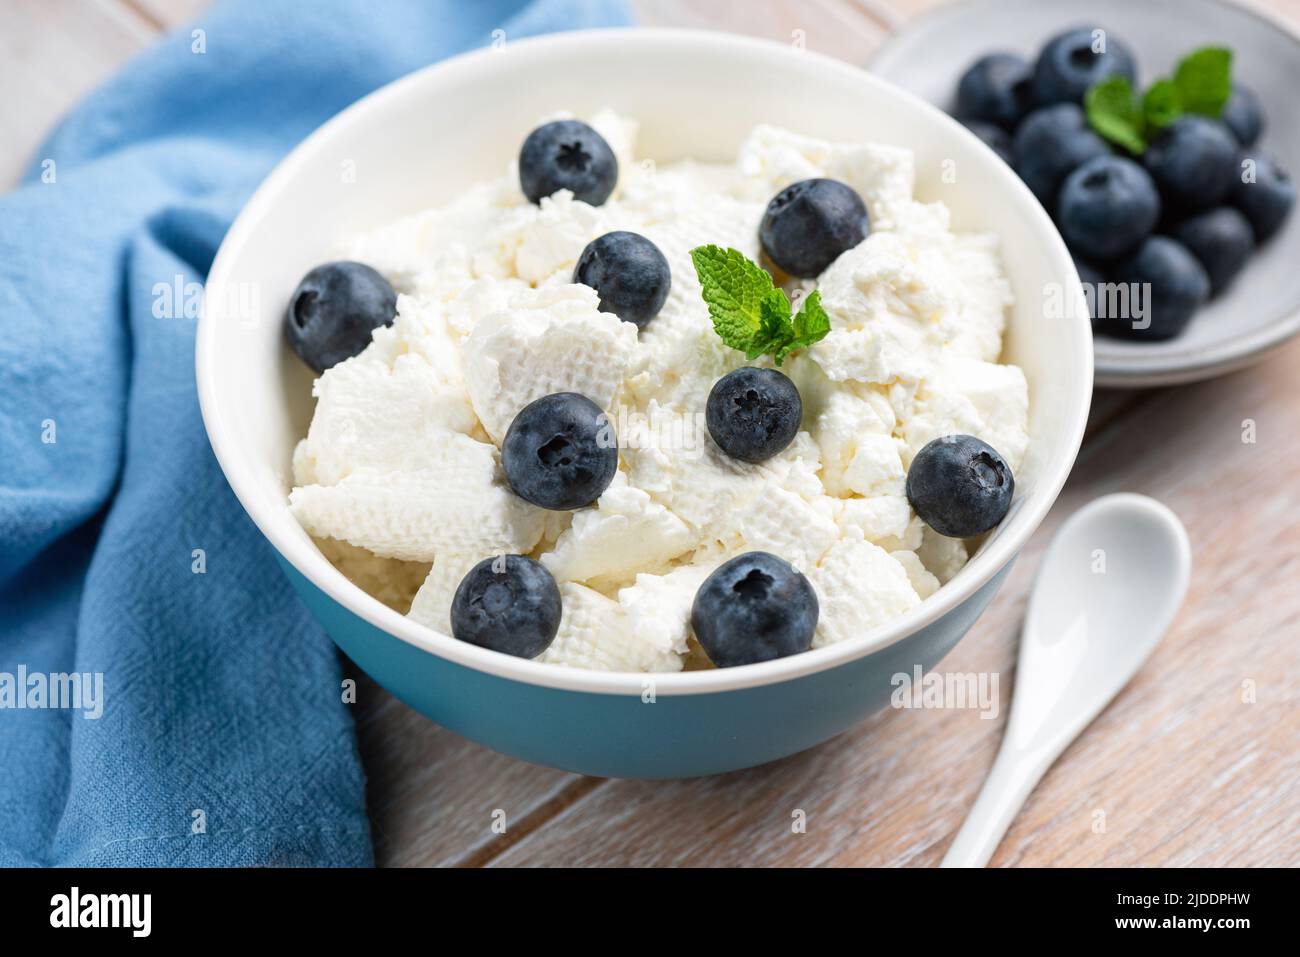 Curd cheese or cottage cheese with blueberries in bowl on wooden background, closeup view Stock Photo